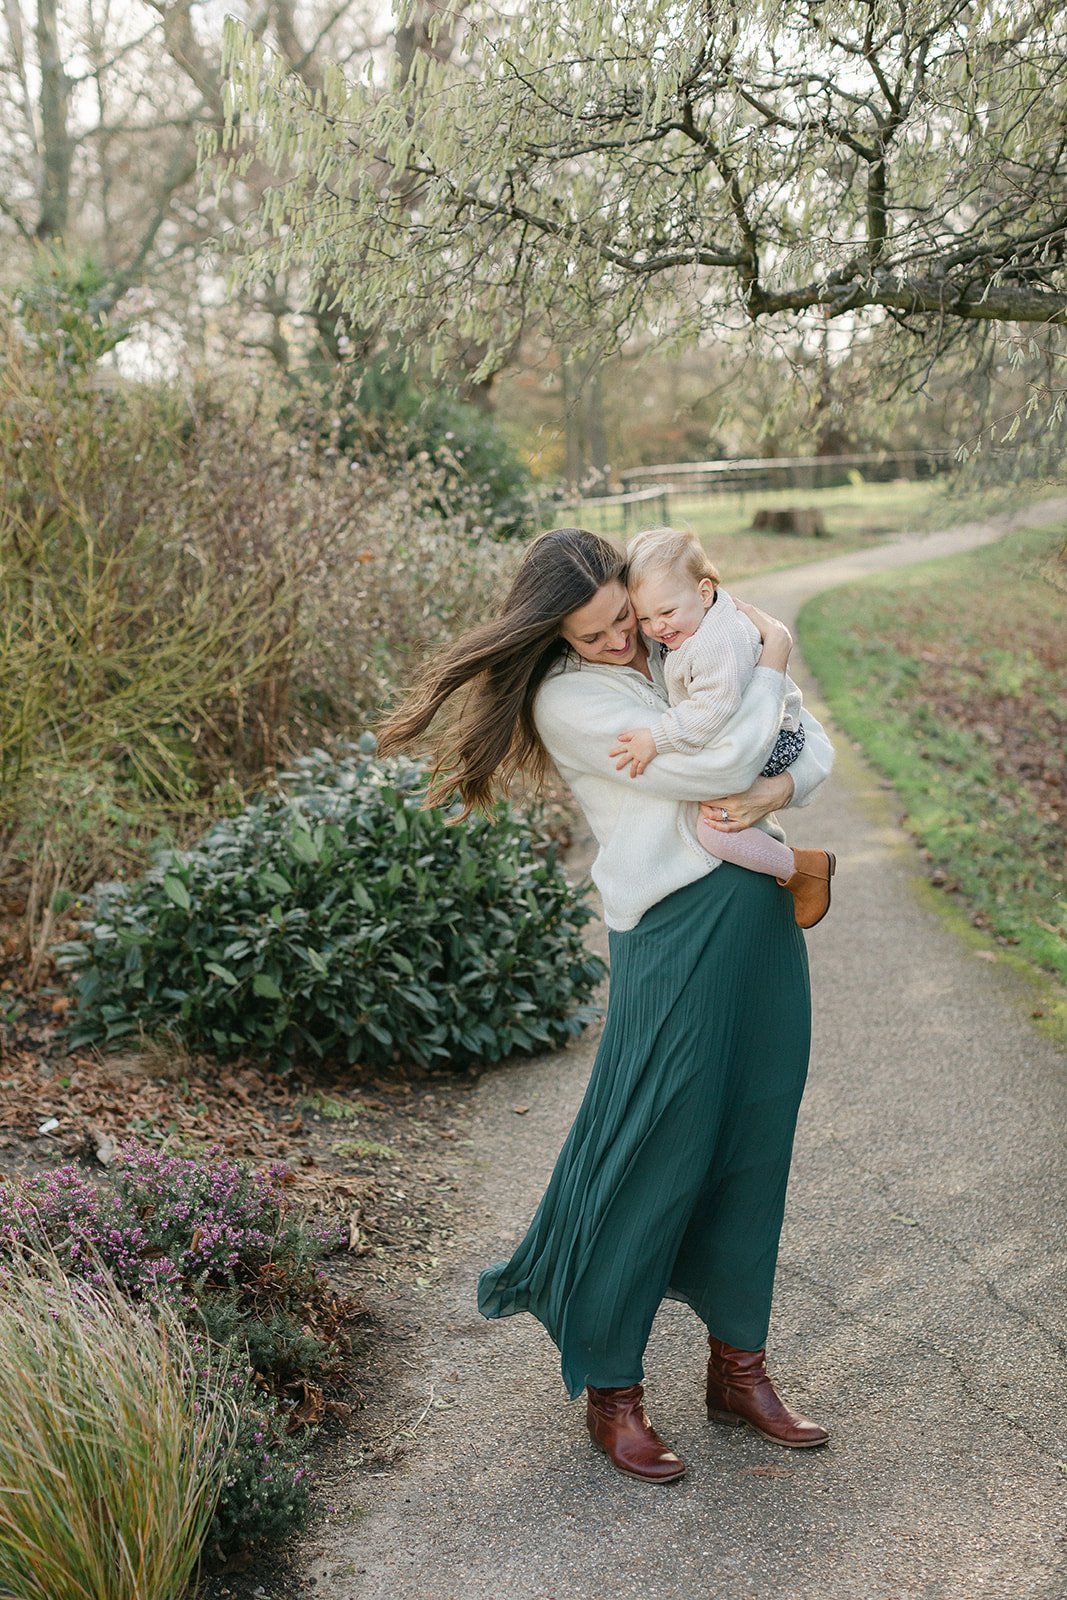  Family photographer captures mother and daughter hugging  in richmond park London 